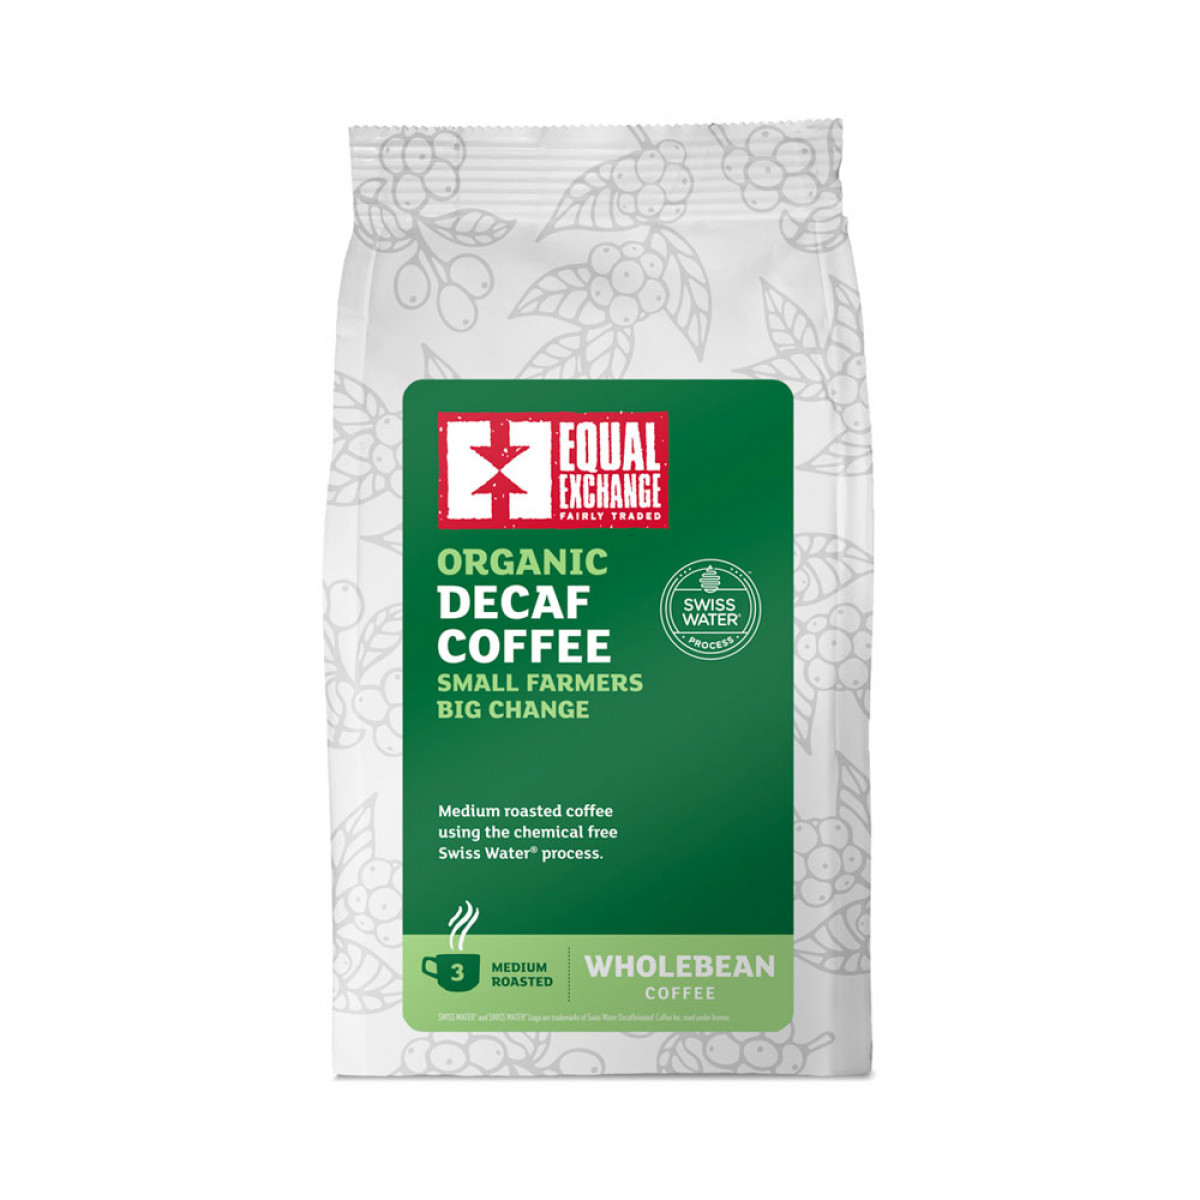 Product picture for Coffee Beans - Decaffeinated (Swiss Water) - DISCOUNTED